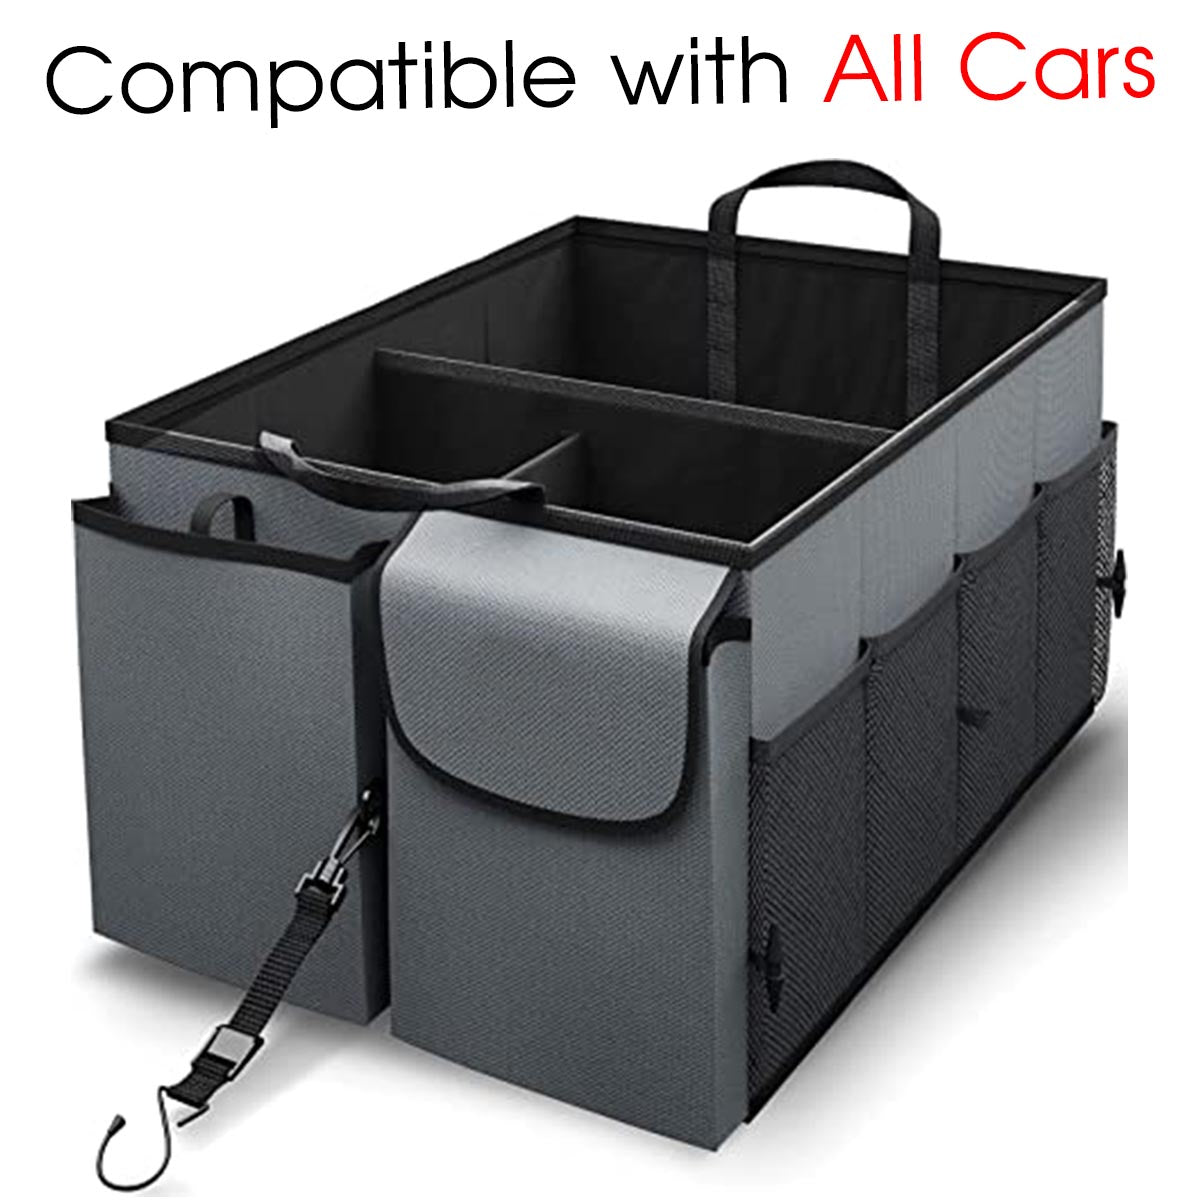 Car Trunk Organizer - Collapsible, Custom fit for All Cars, Multi-Compartment Automotive SUV Car Organizer for Storage w/ Adjustable Straps - Car Accessories for Women and Men MA12993